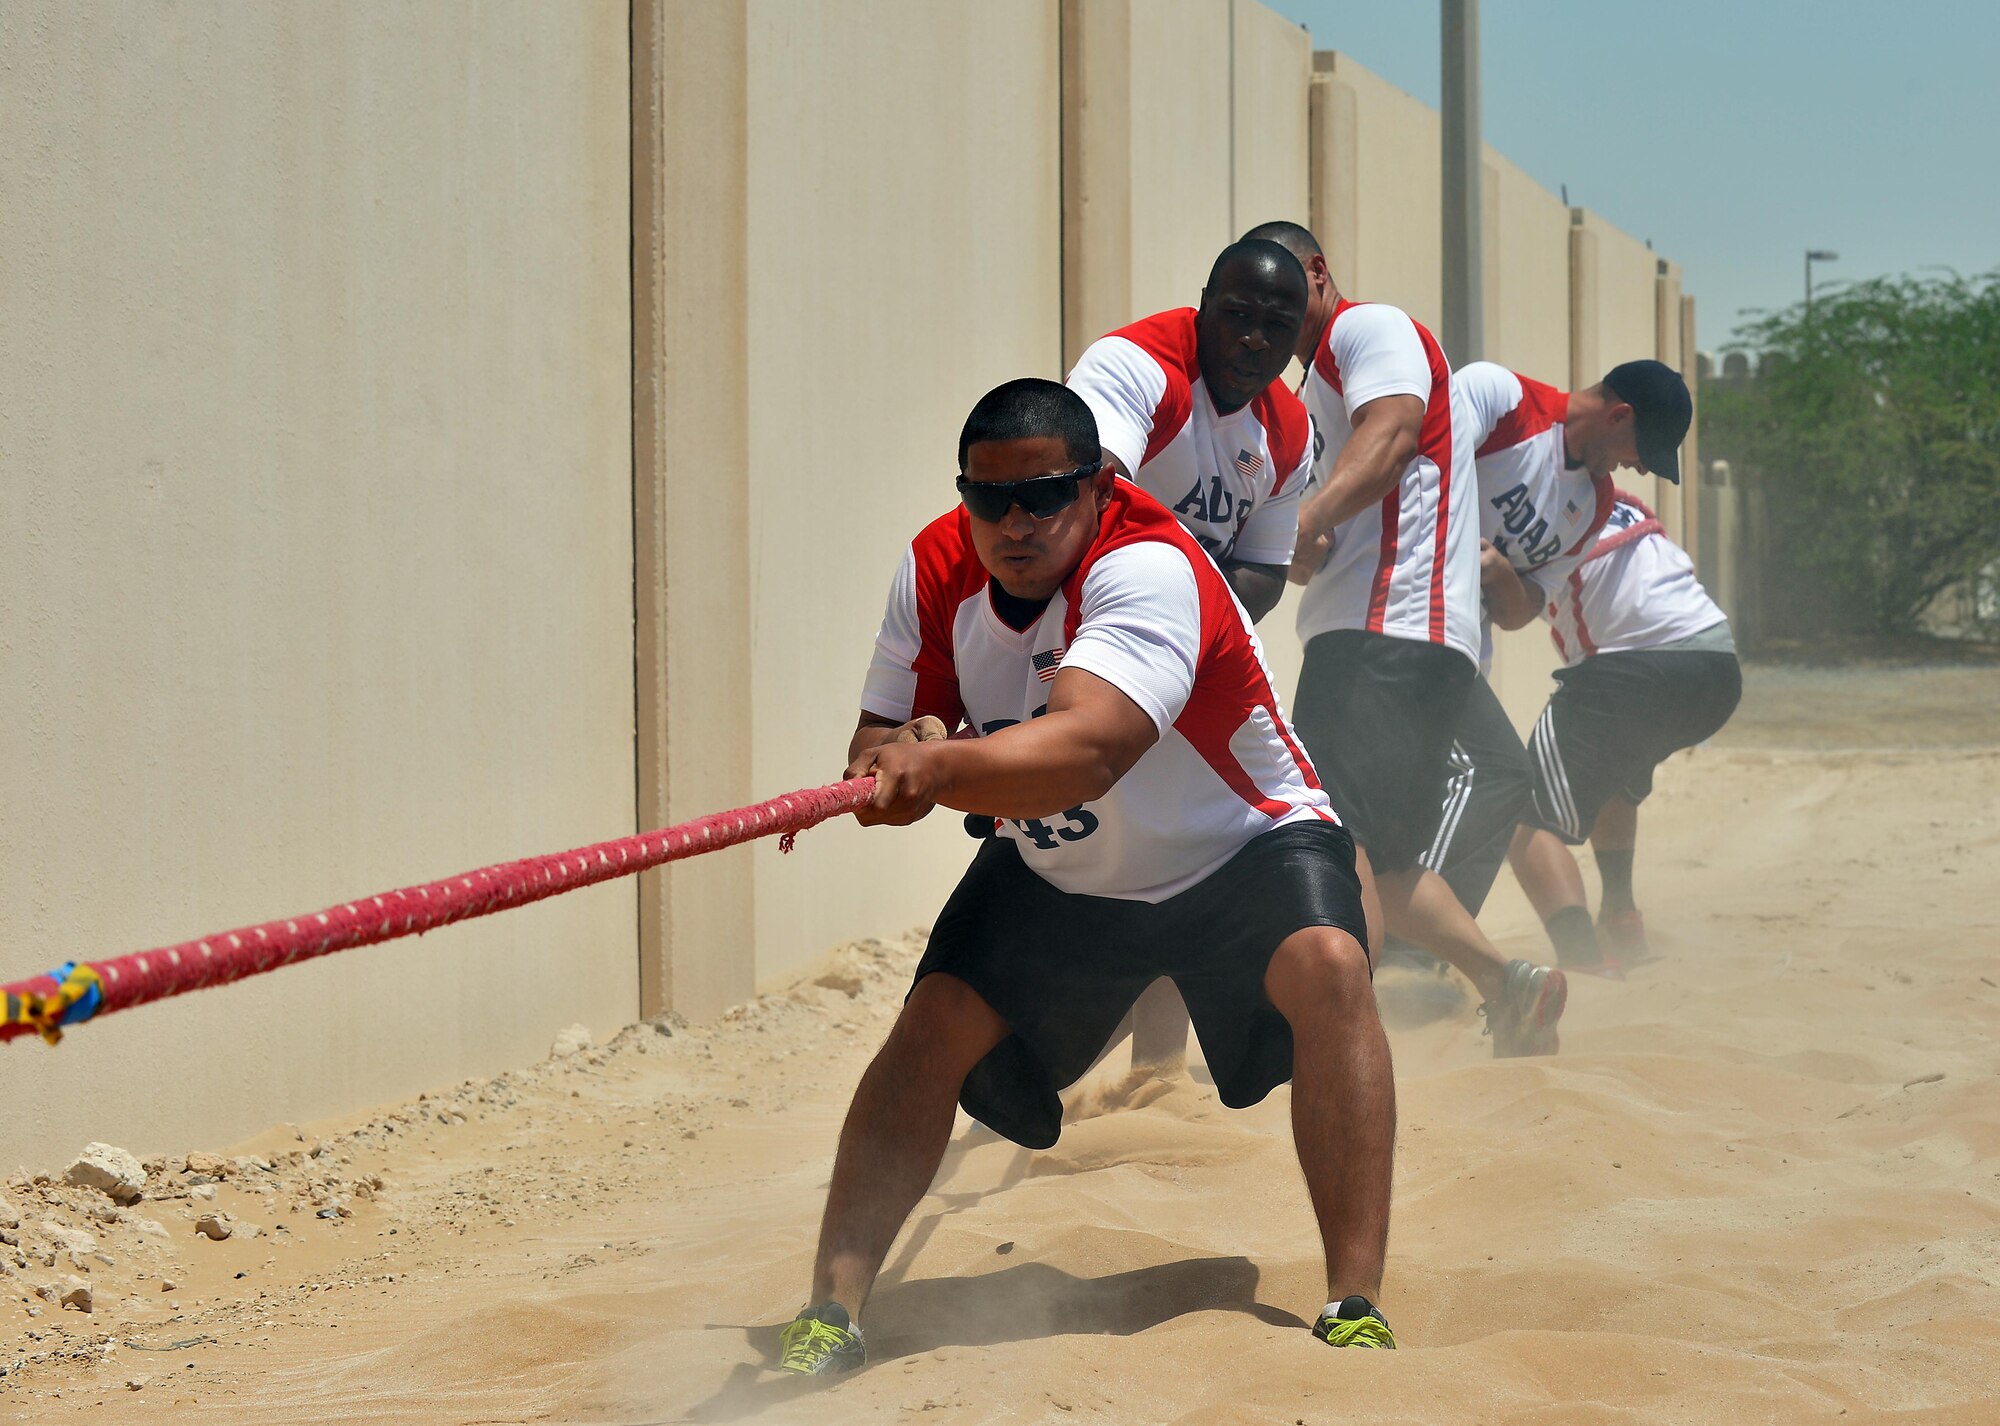 The U.S. tug-o-war team competes in the Friendship Games at undisclosed location in Southwest Asia May 27, 2015. The tri-sport event is held every two months. In this installment of the games, teams went head-to-head in a 5K run, volleyball and tug-o-war. (U.S. Air Force photo/ Tech. Sgt. Jeff Andrejcik)